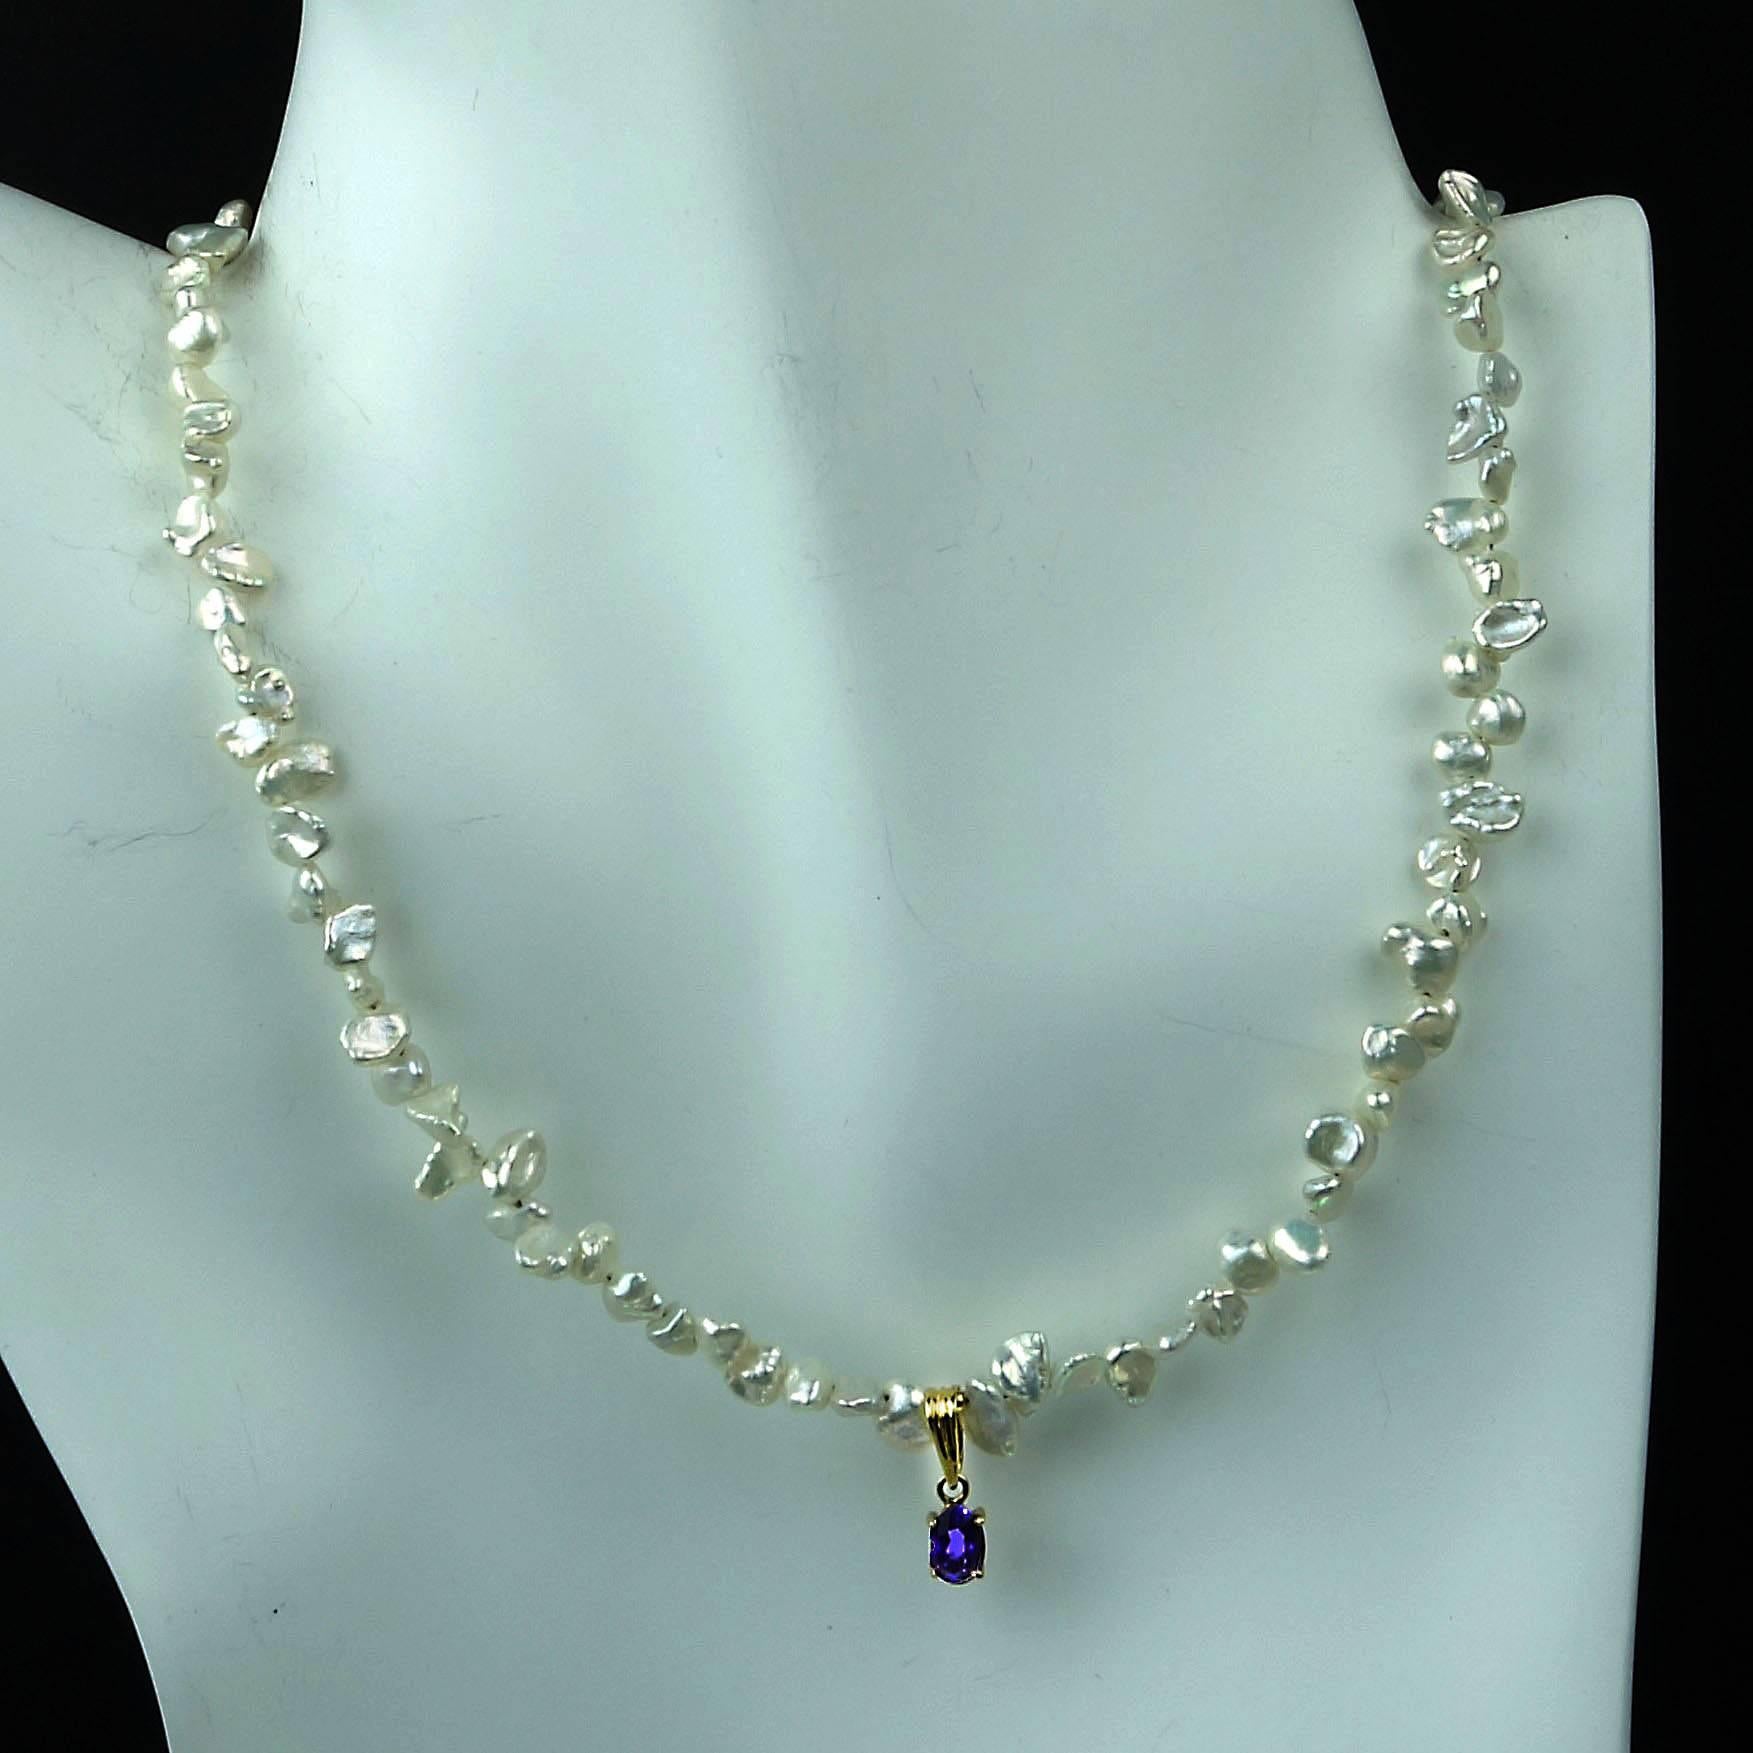 Artisan AJD Freshwater Pearl Necklace with Amethyst in 18K Yellow Gold